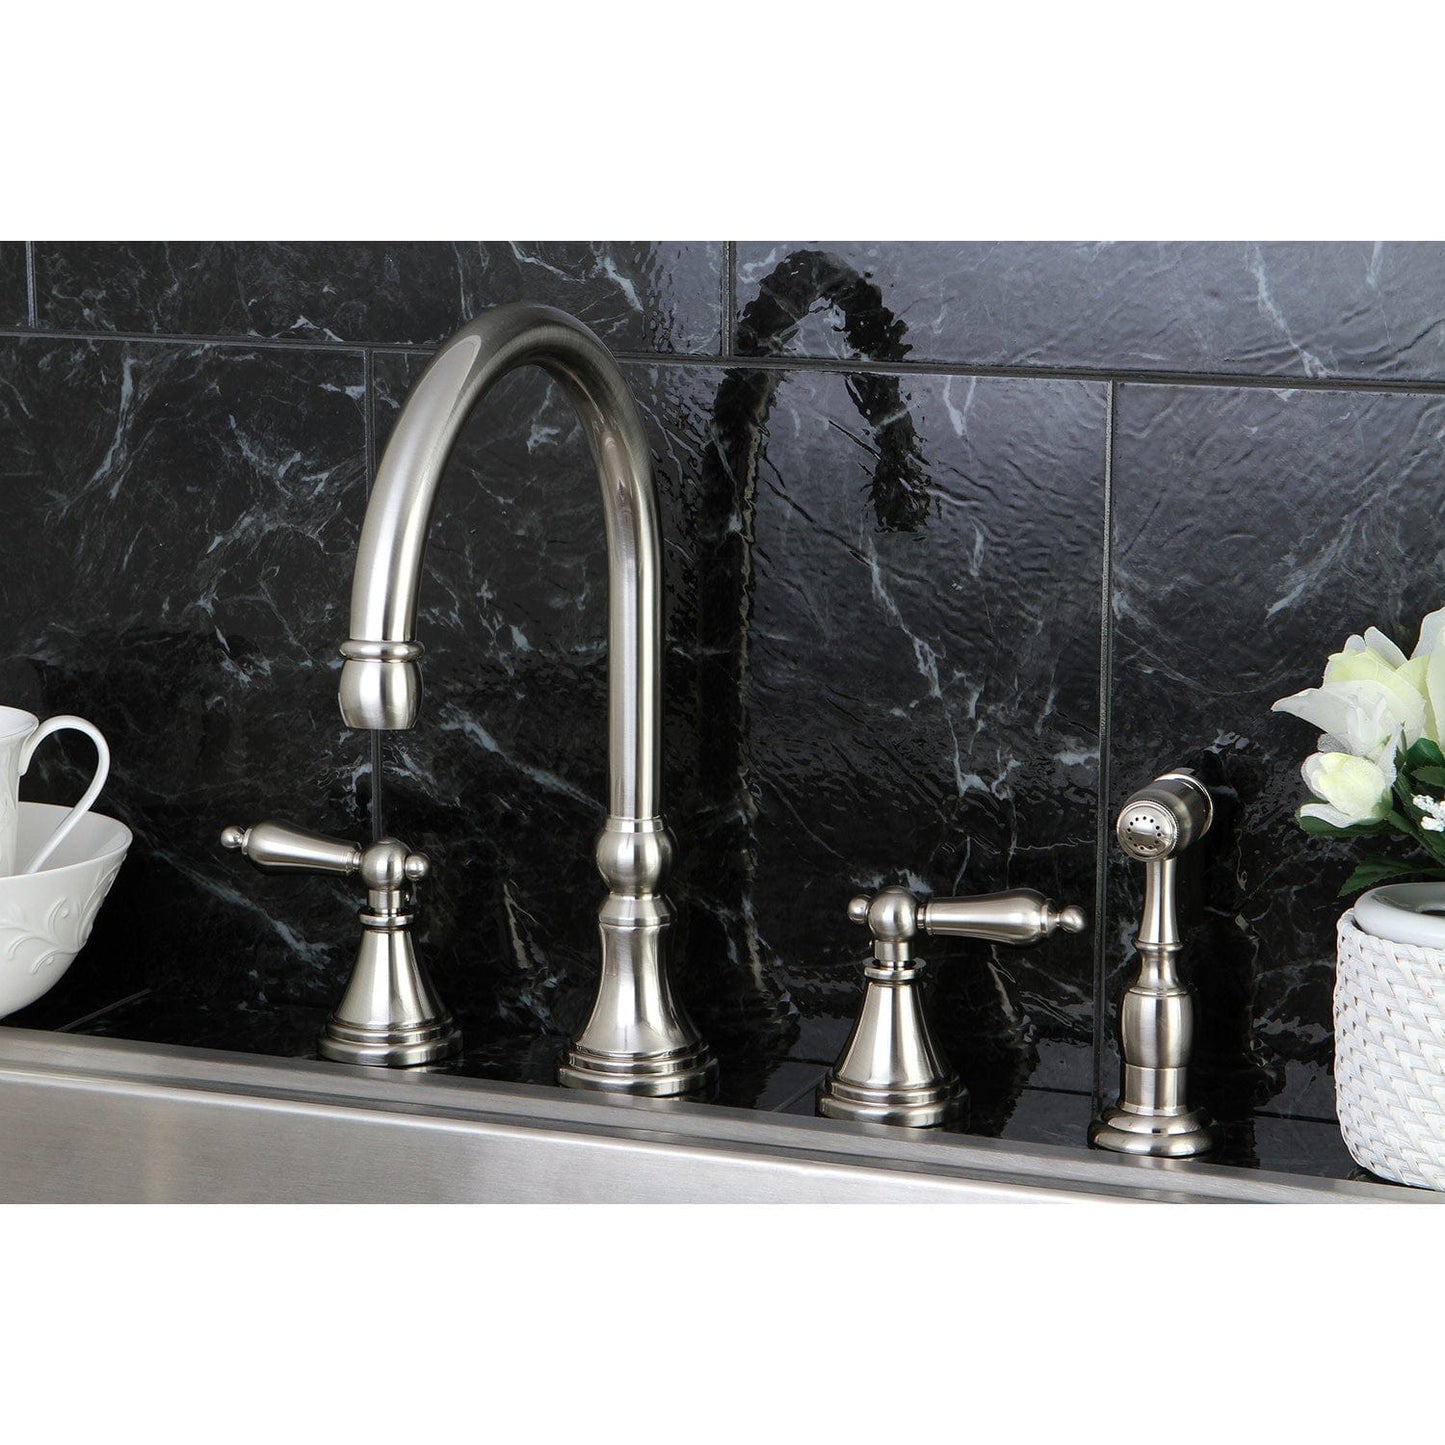 KINGSTON Brass Widespread Kitchen Faucet - Brushed Nickel